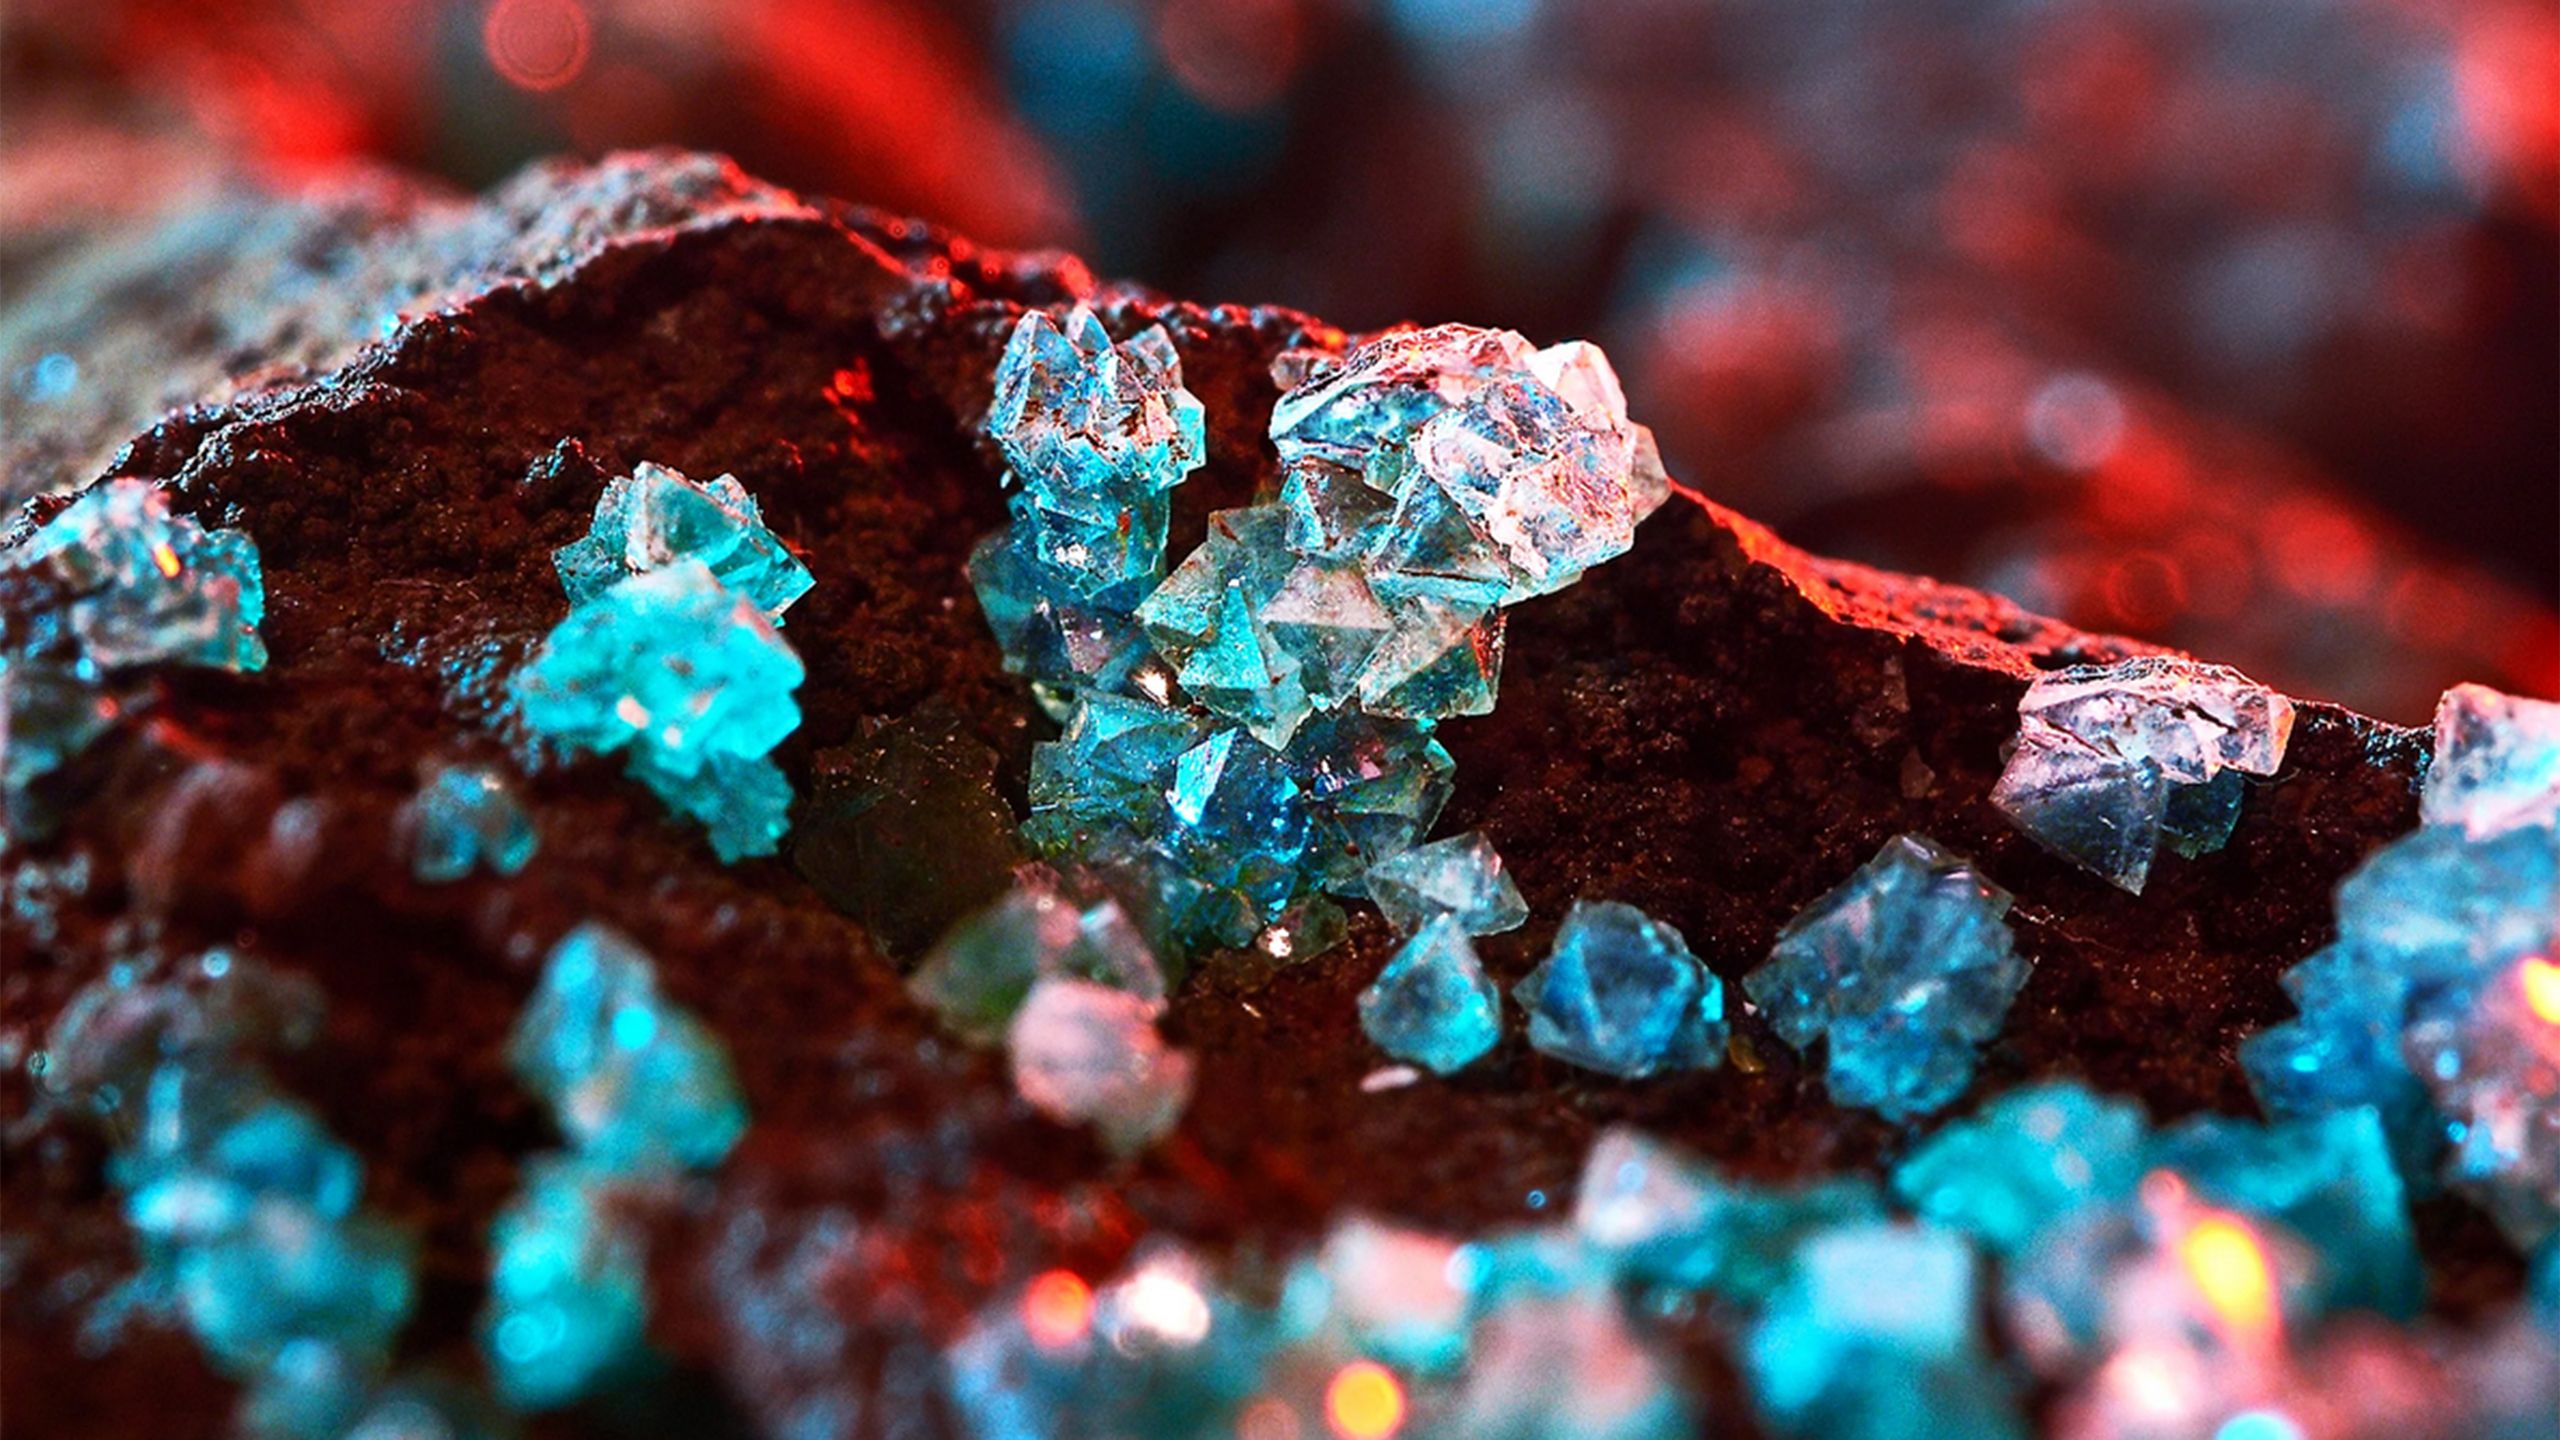 Blue crystals on red dirt demonstrating detailed images on Sony TVs